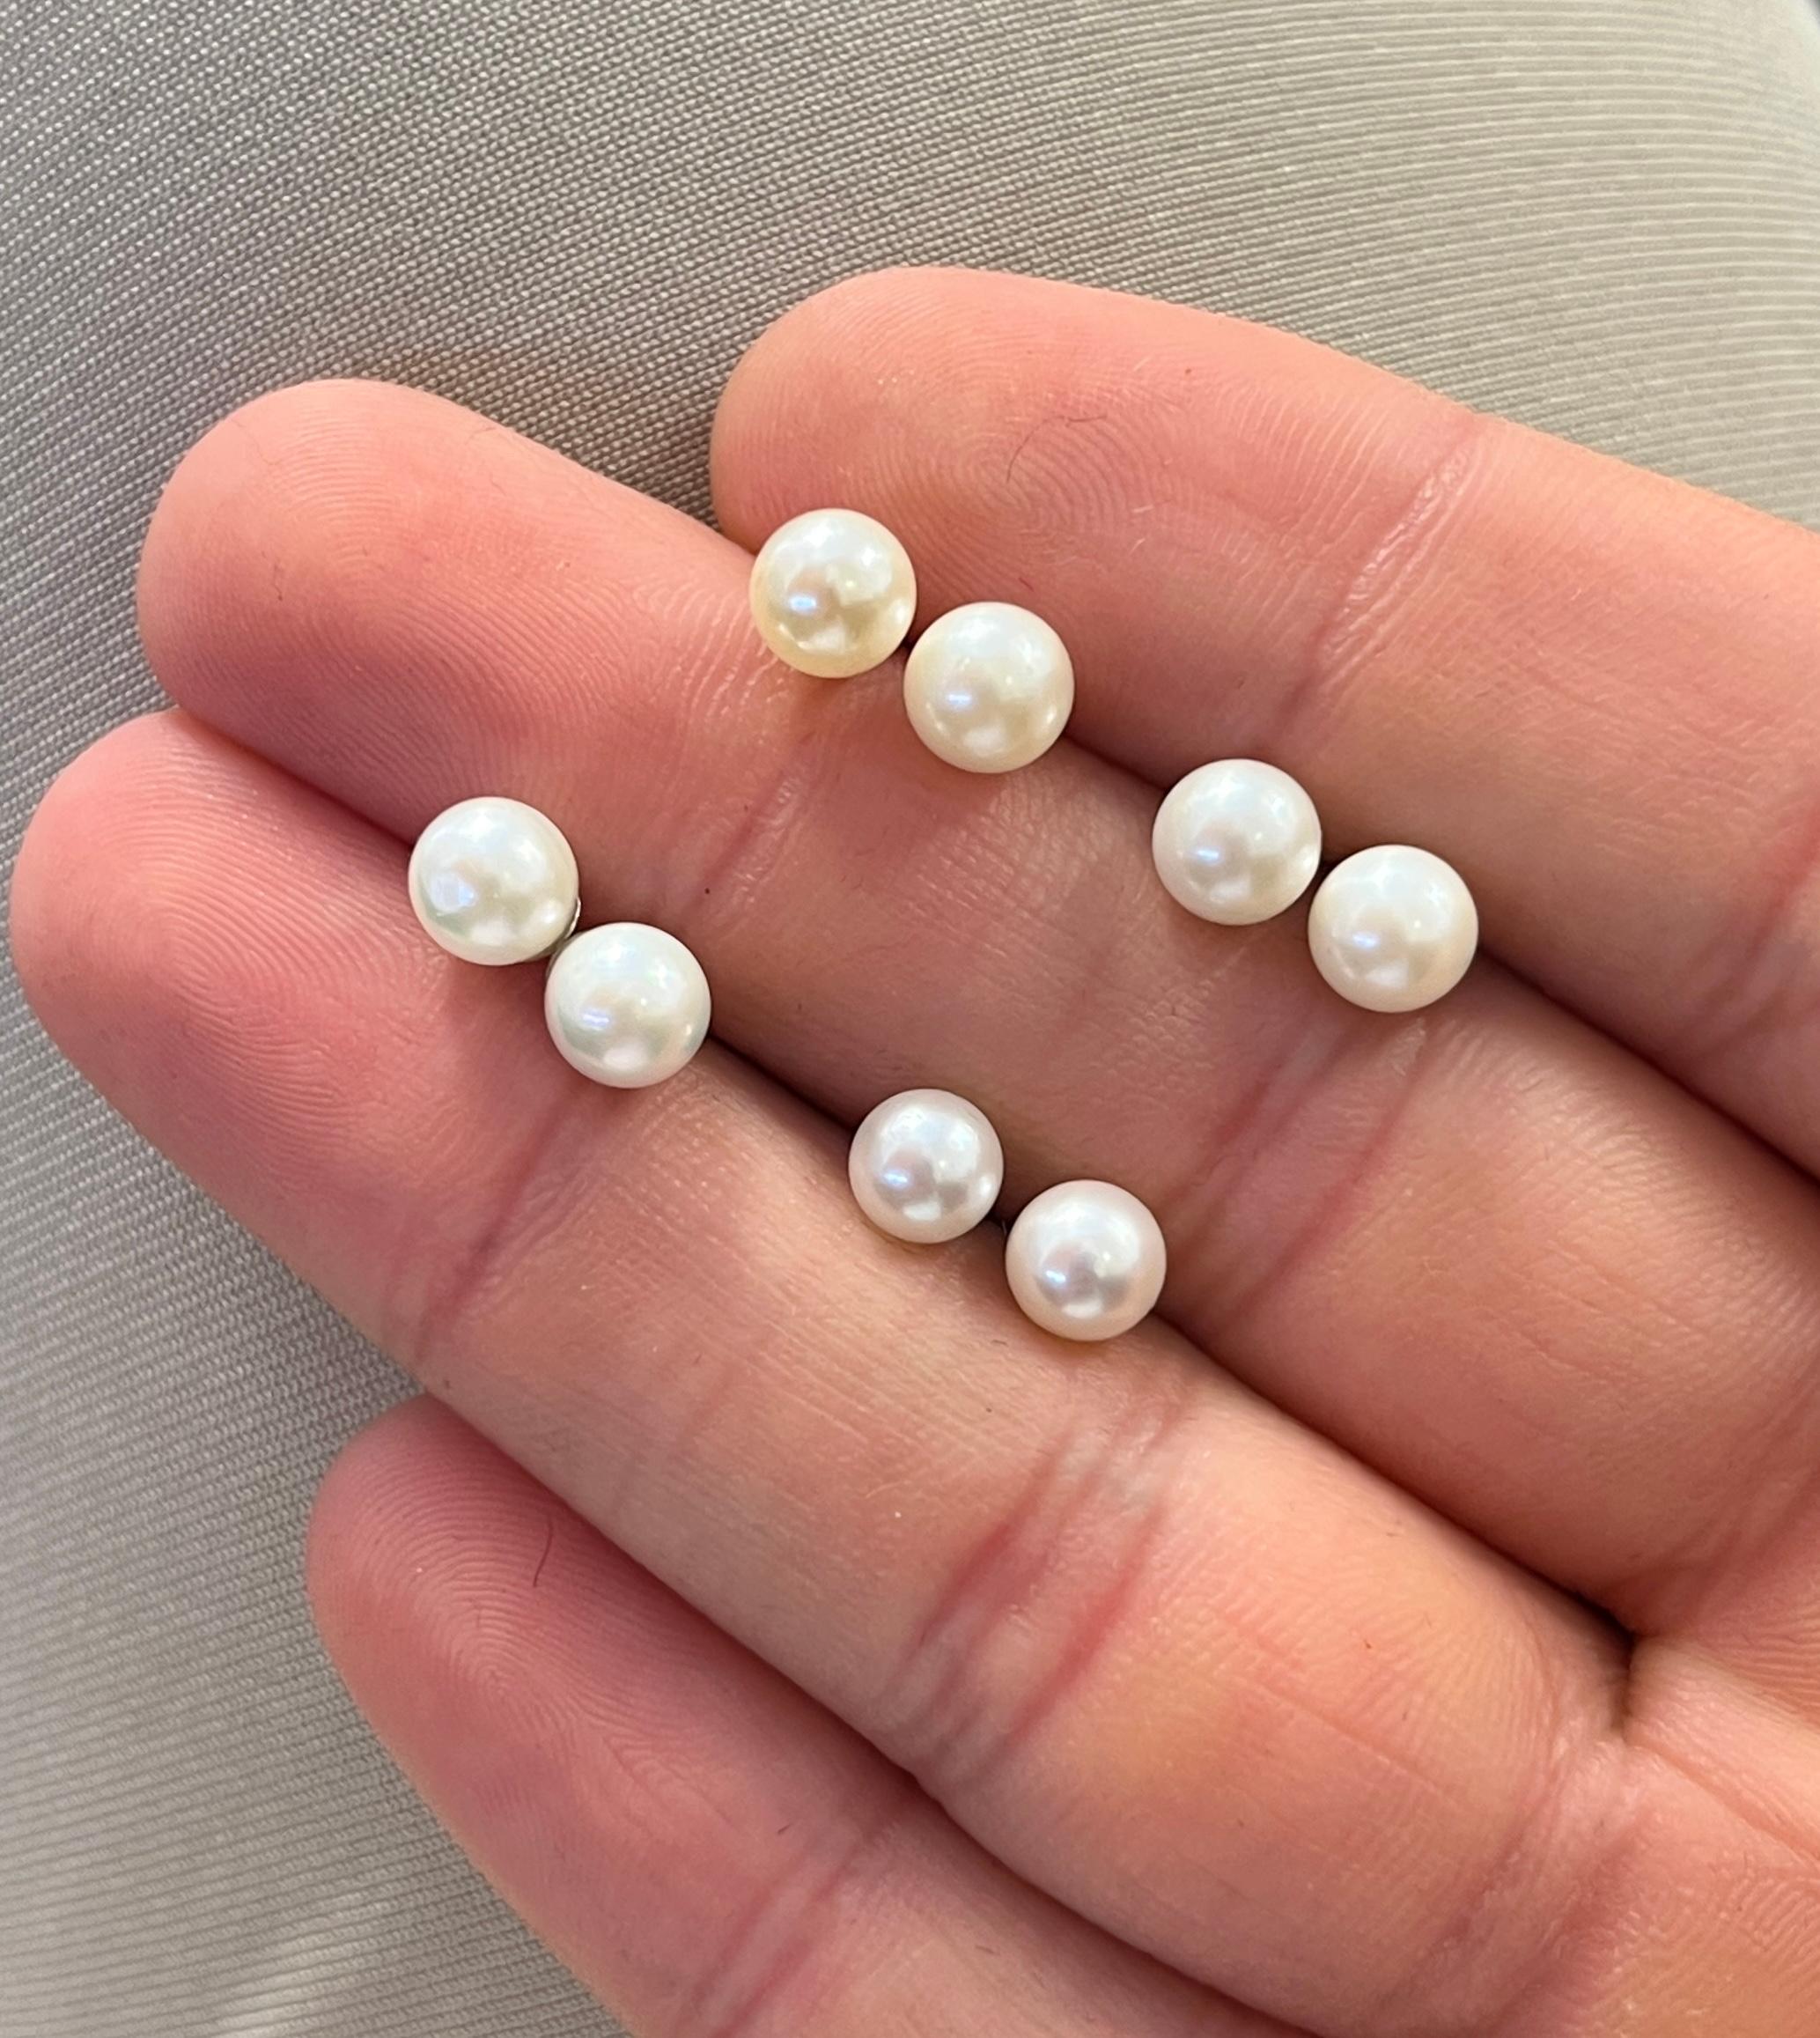 6mm Japanese Freshwater White Pearl Stud Earrings in 925 Sterling Silver In New Condition For Sale In Miami, FL